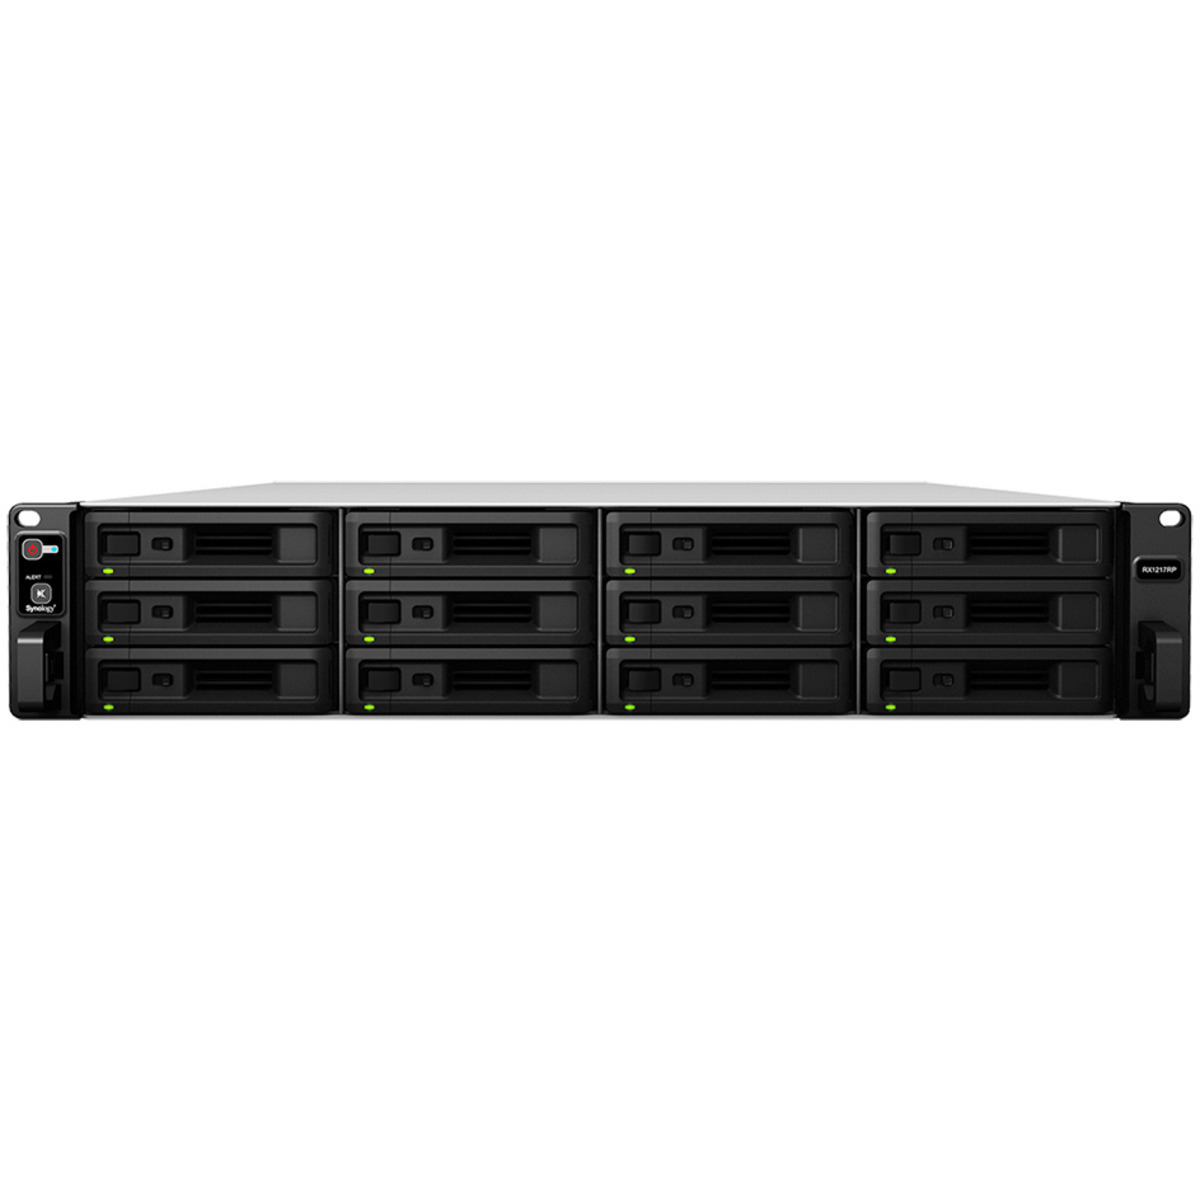 buy $5480 Synology RX1217 192tb RackMount Expansion Enclosure 12x16000gb Toshiba Enterprise Capacity MG08ACA16TE 3.5 7200rpm SATA 6Gb/s HDD ENTERPRISE Class Drives Installed - Burn-In Tested - nas headquarters buy network attached storage server device das new raid-5 free shipping usa RX1217